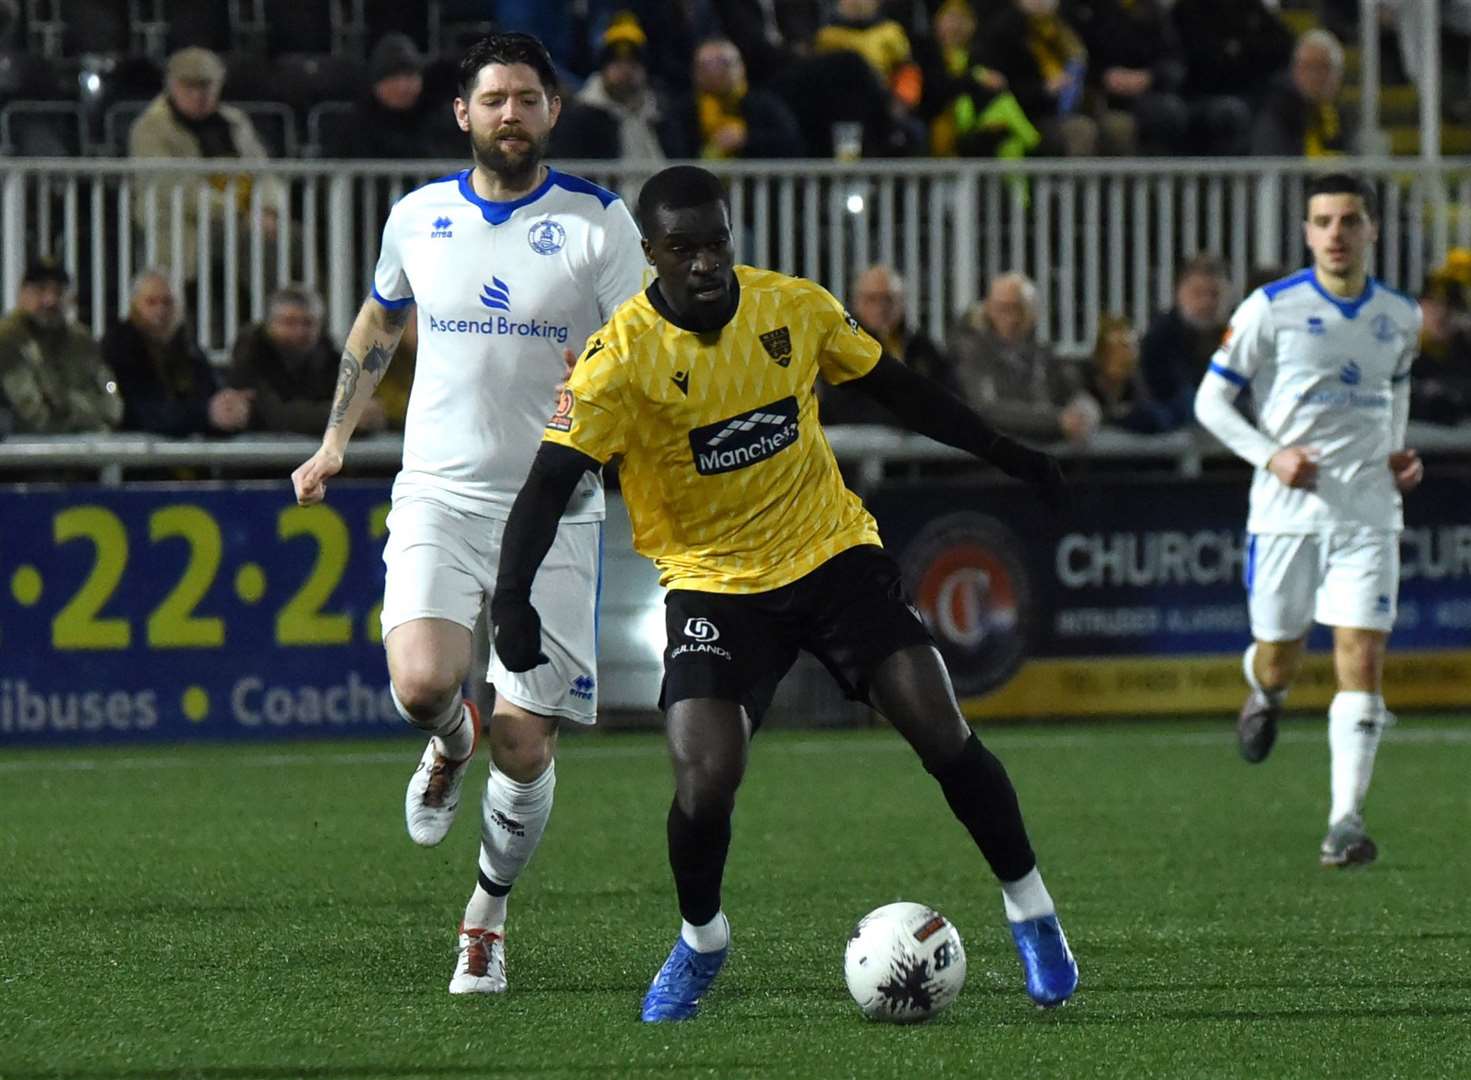 Jacob Berkeley-Agyepong in possession for Maidstone. Picture: Steve Terrell